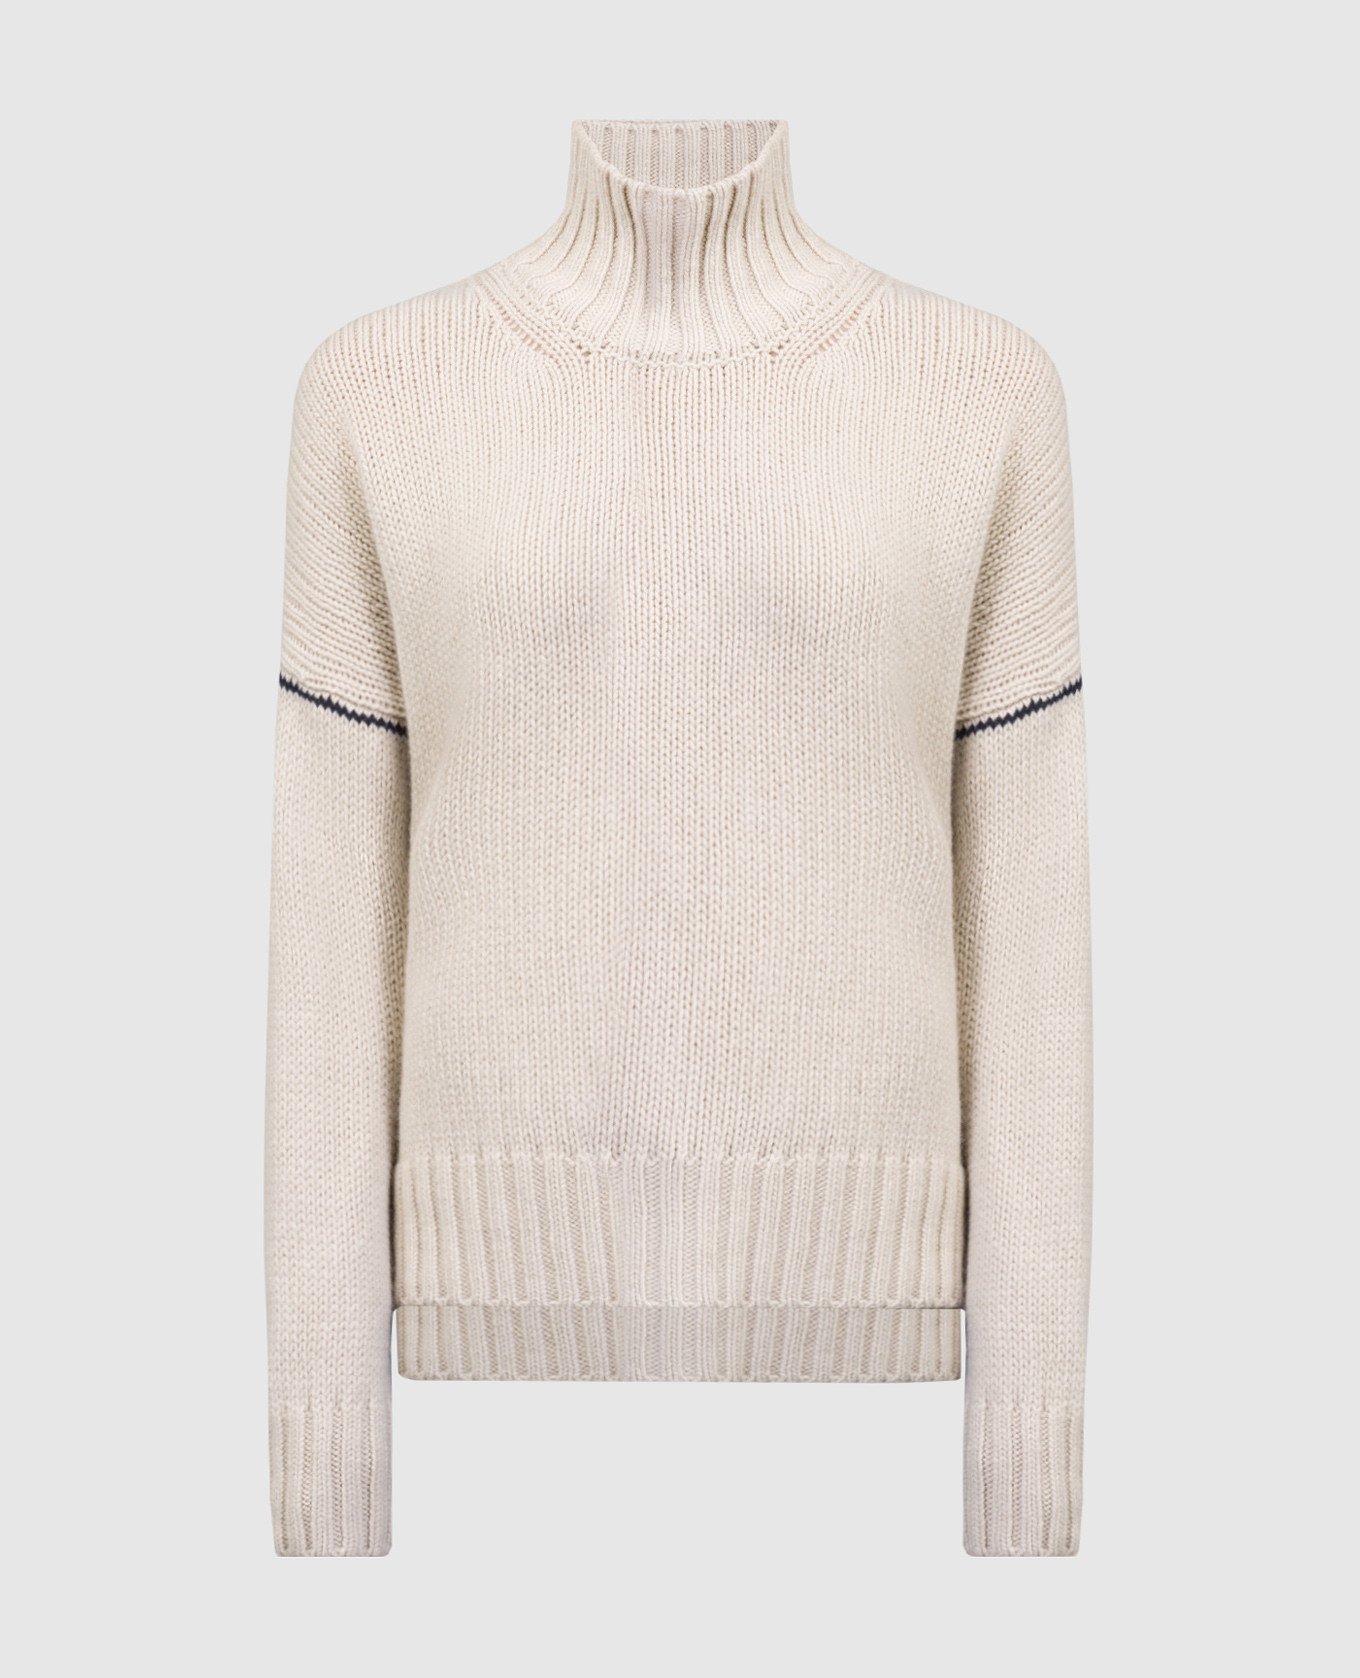 Beige wool sweater with slits